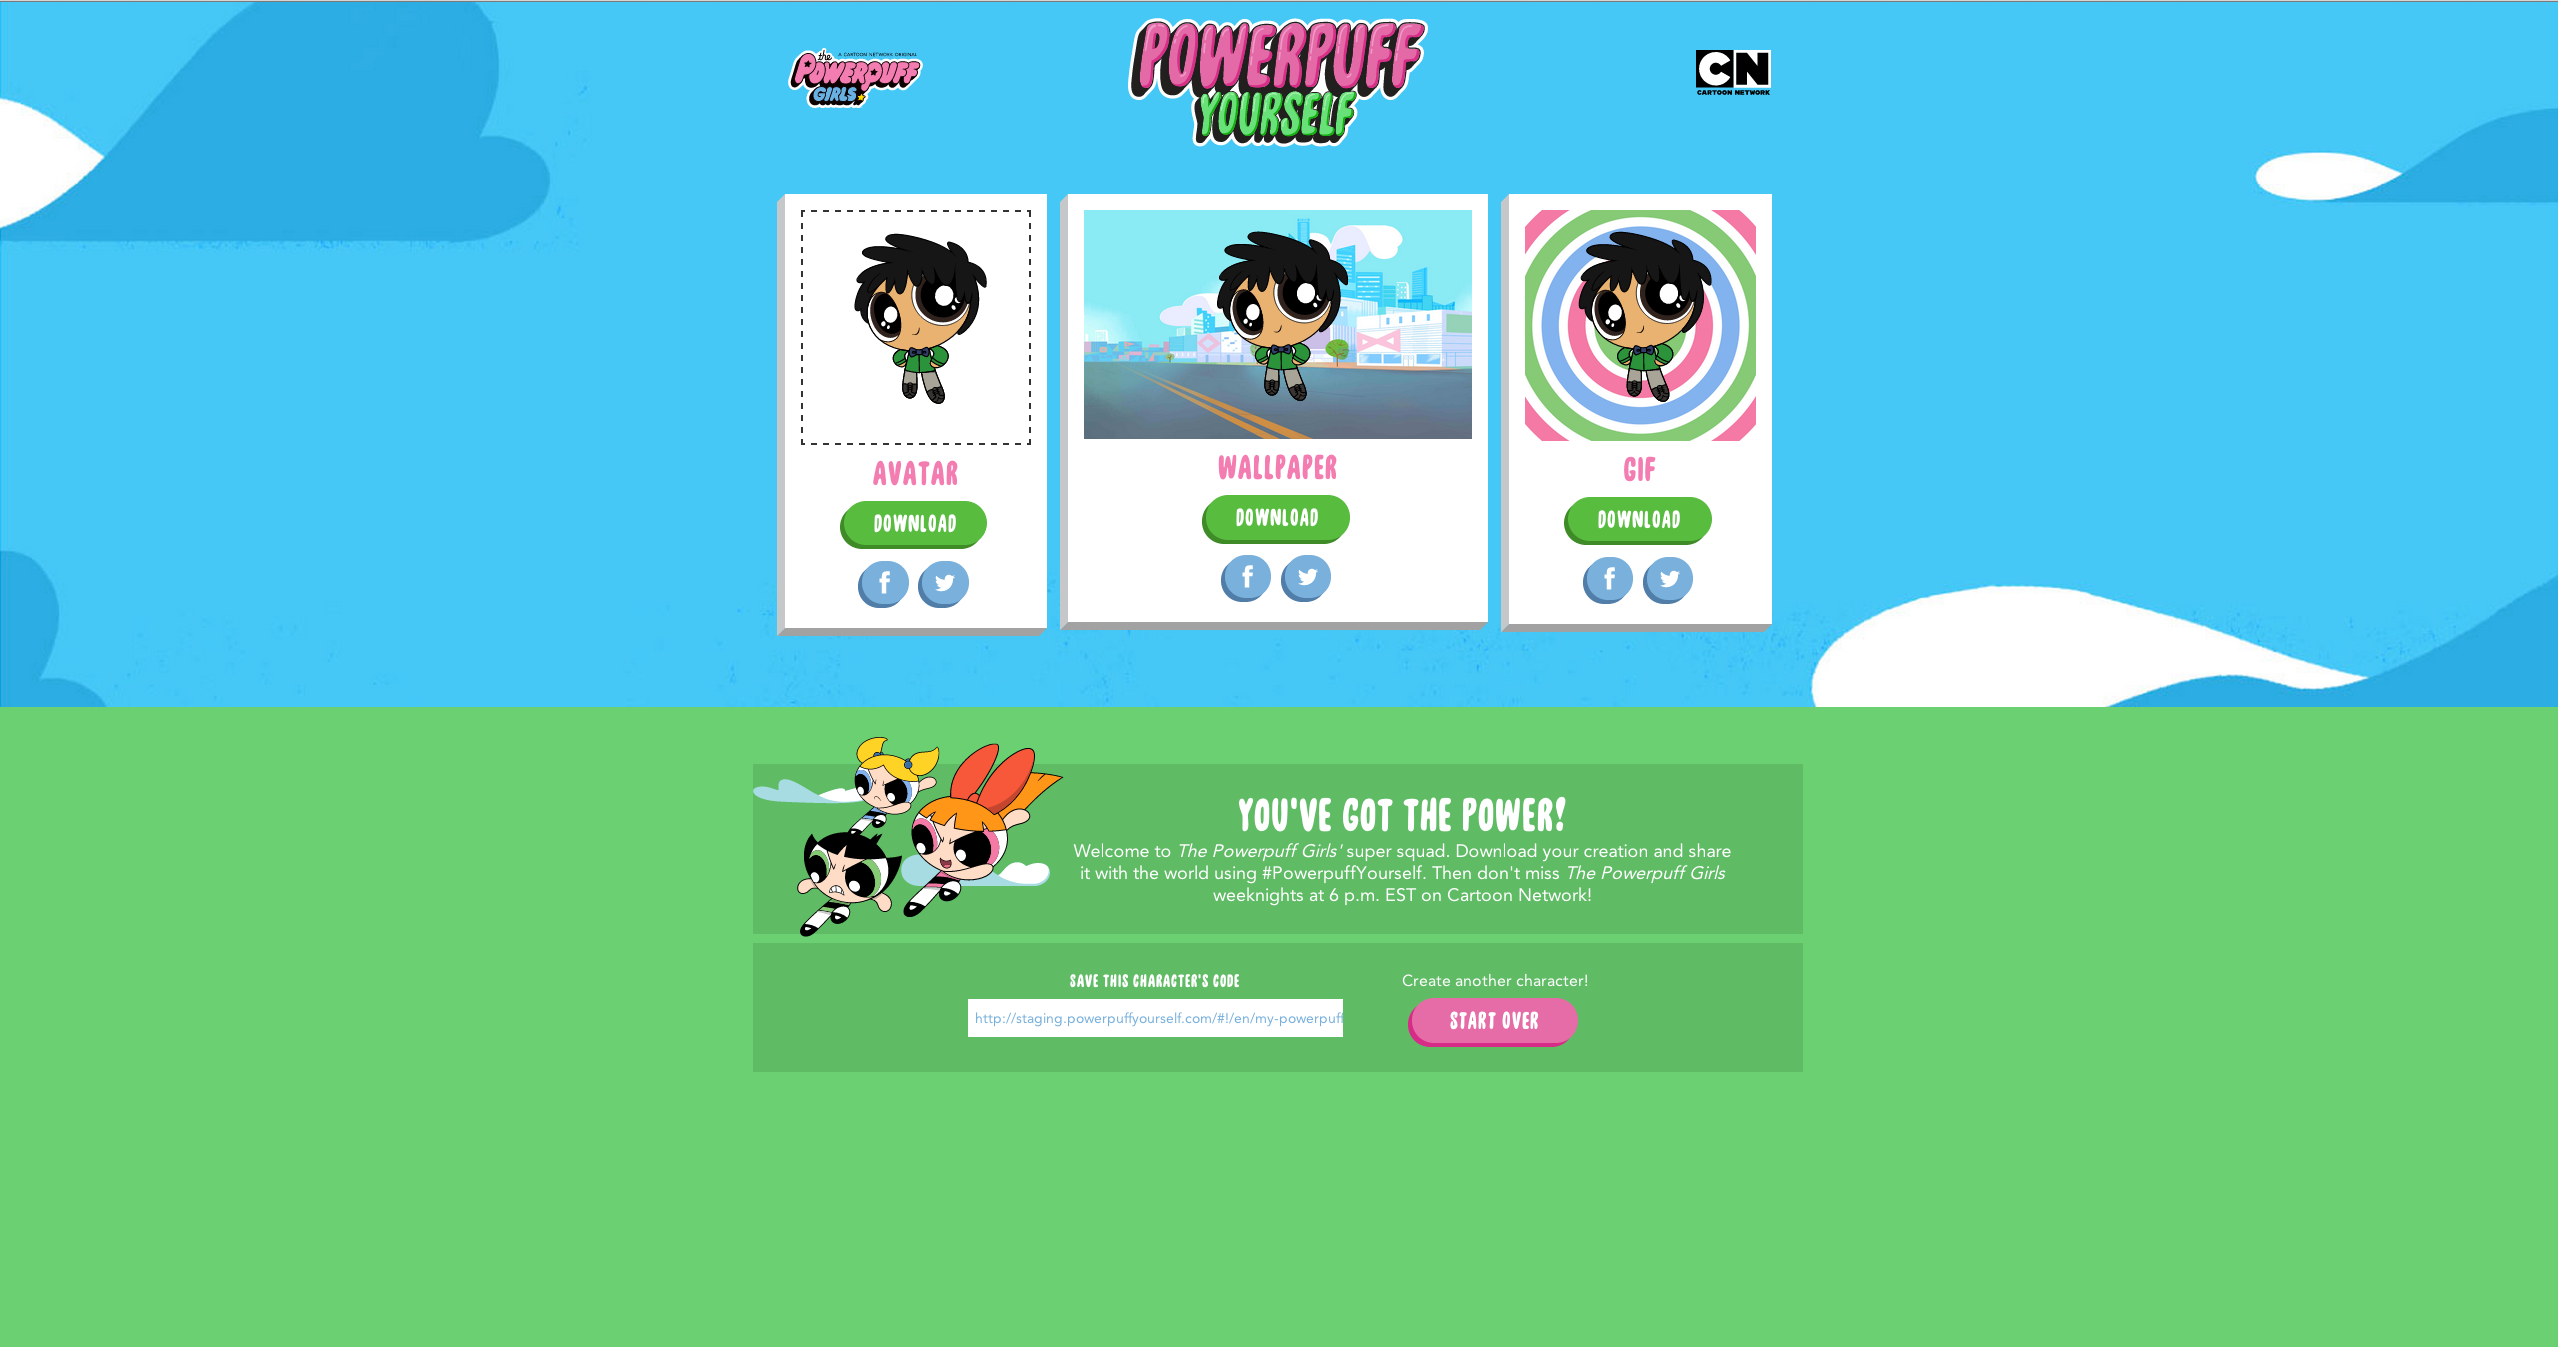 New website turns you into a 'Powerpuff Girl